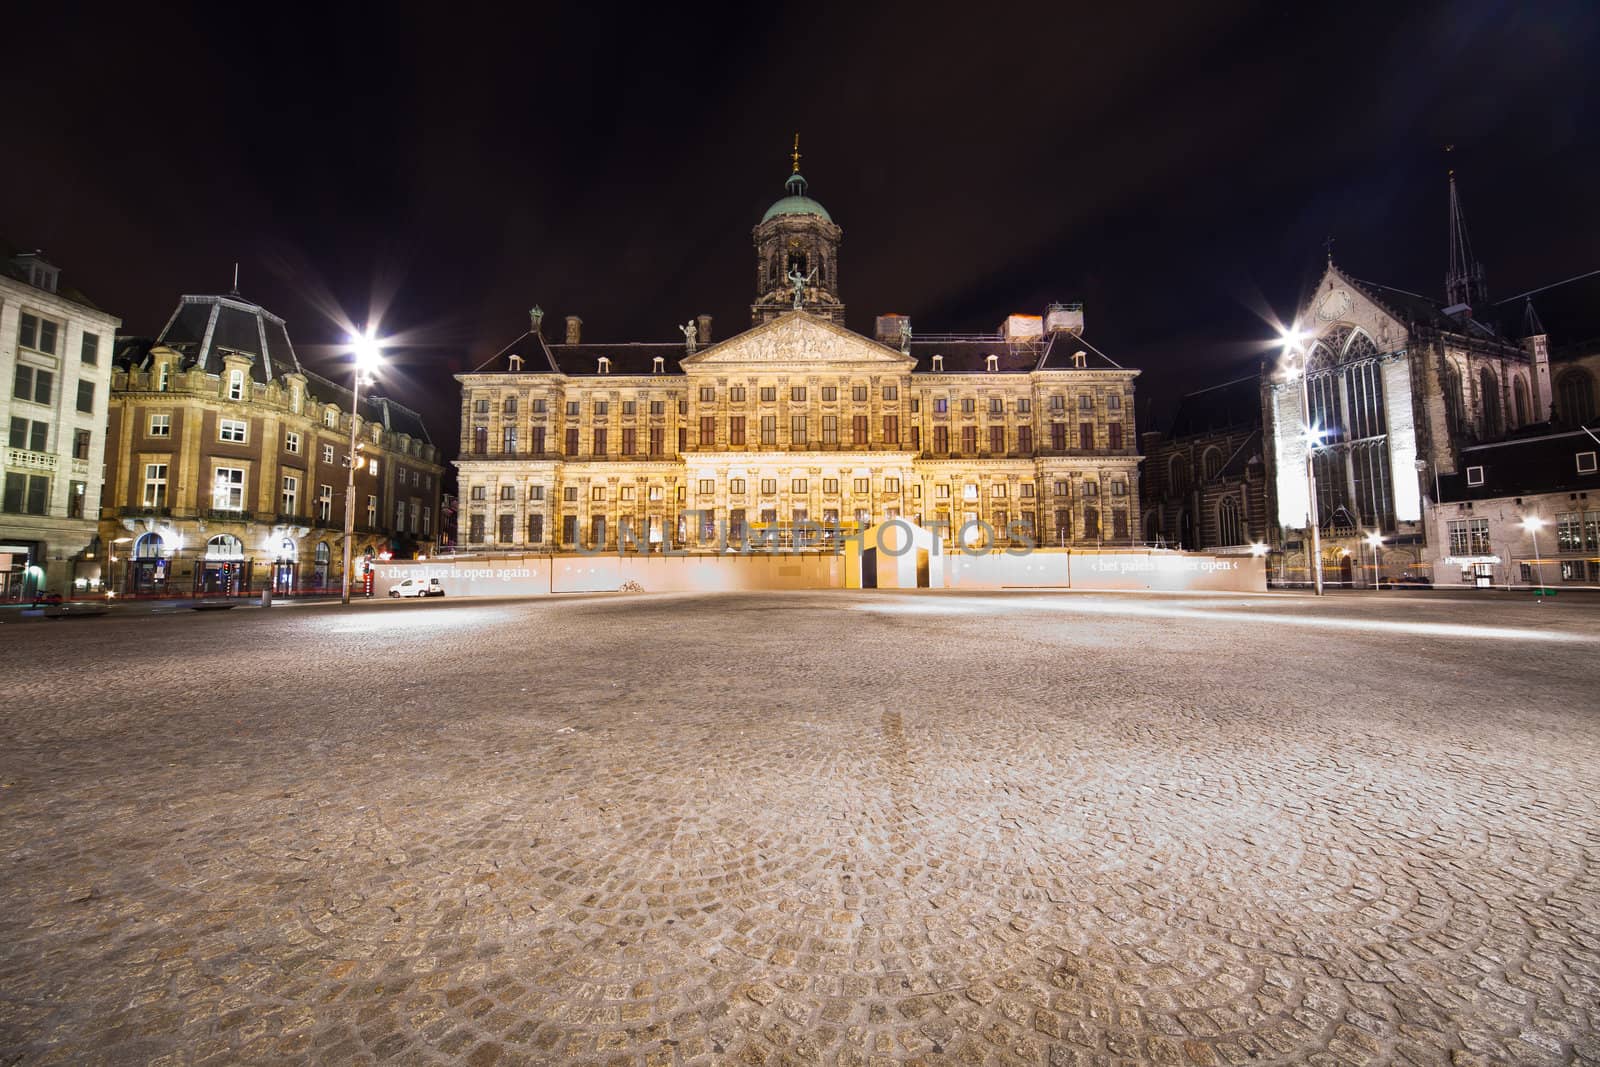 Royal Palace in Amsterdam - night photo taken with long time exposure and ultra wide angle